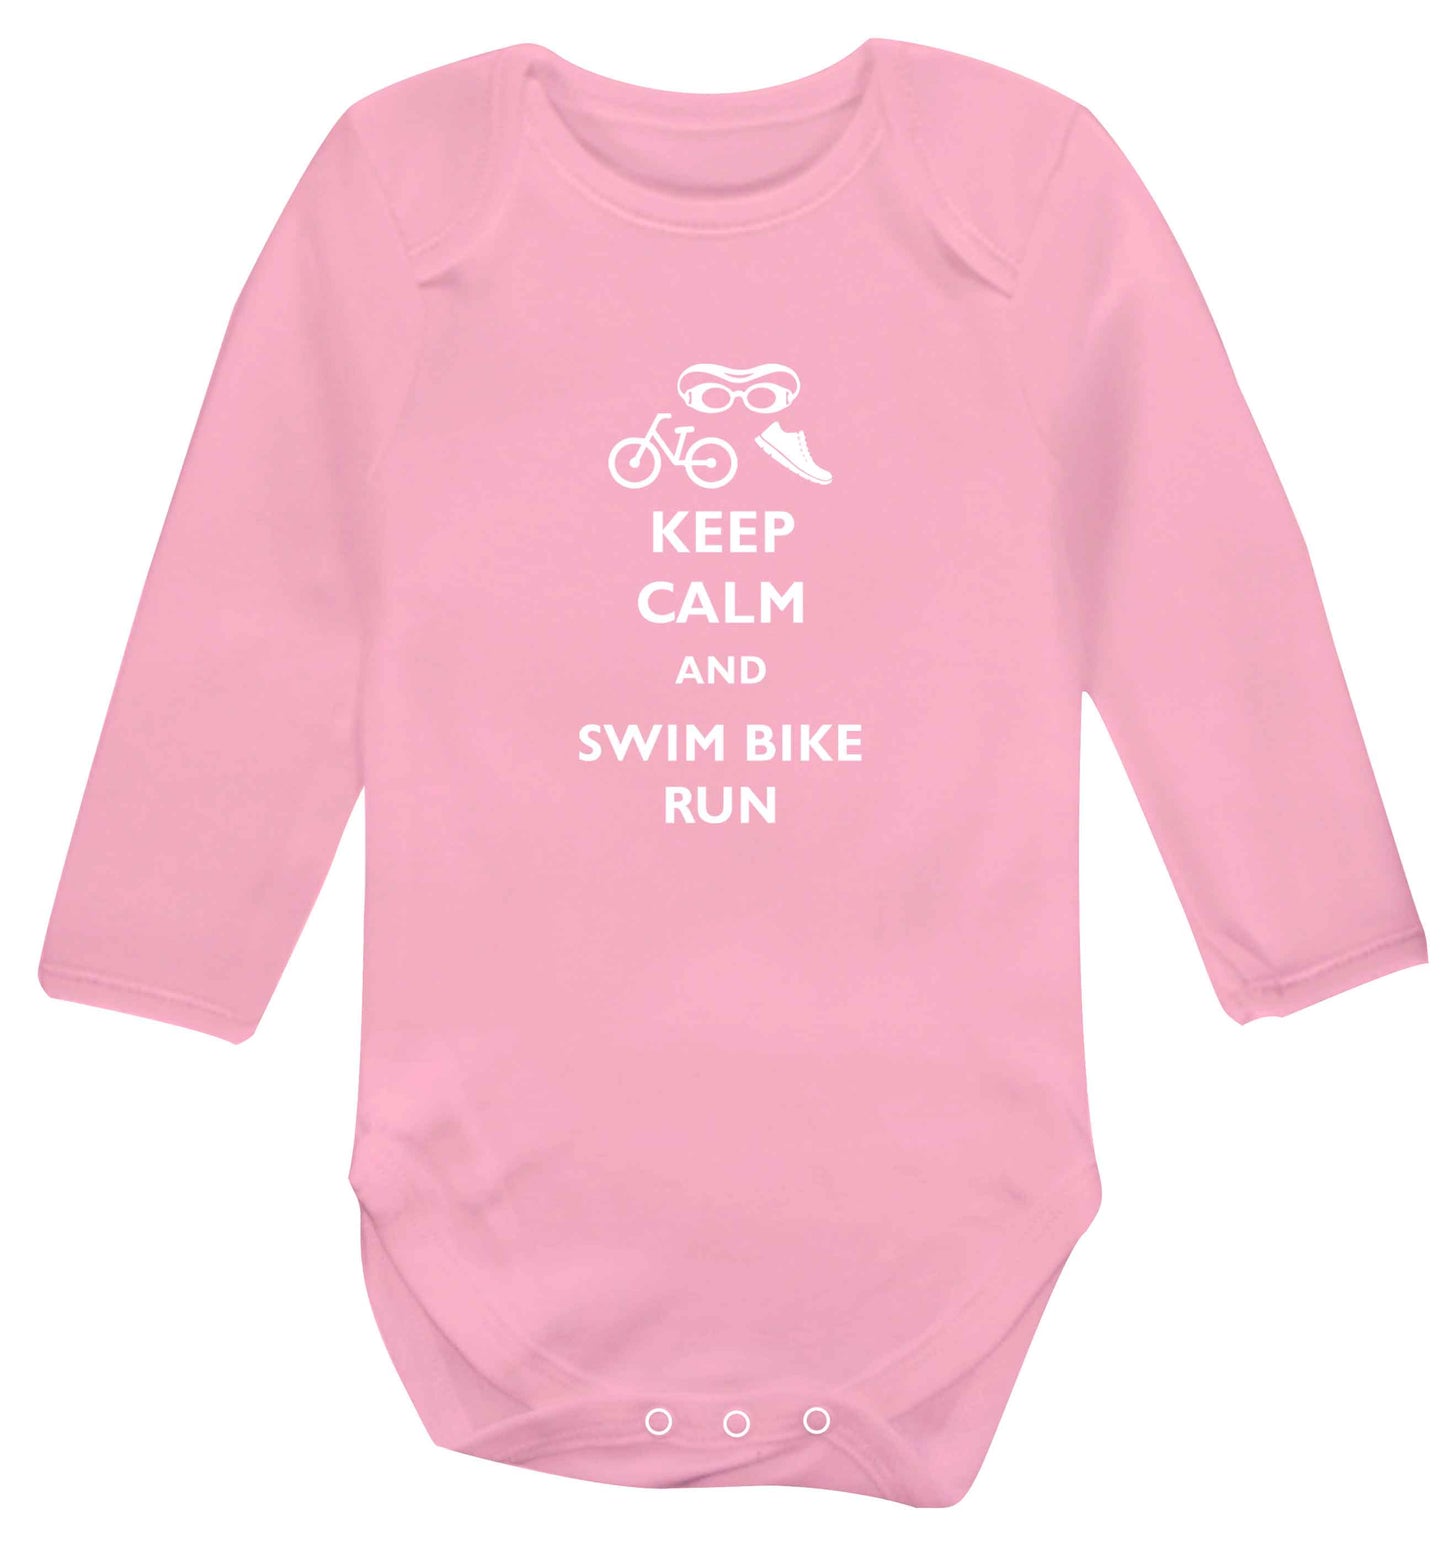 Keep calm and swim bike run baby vest long sleeved pale pink 6-12 months